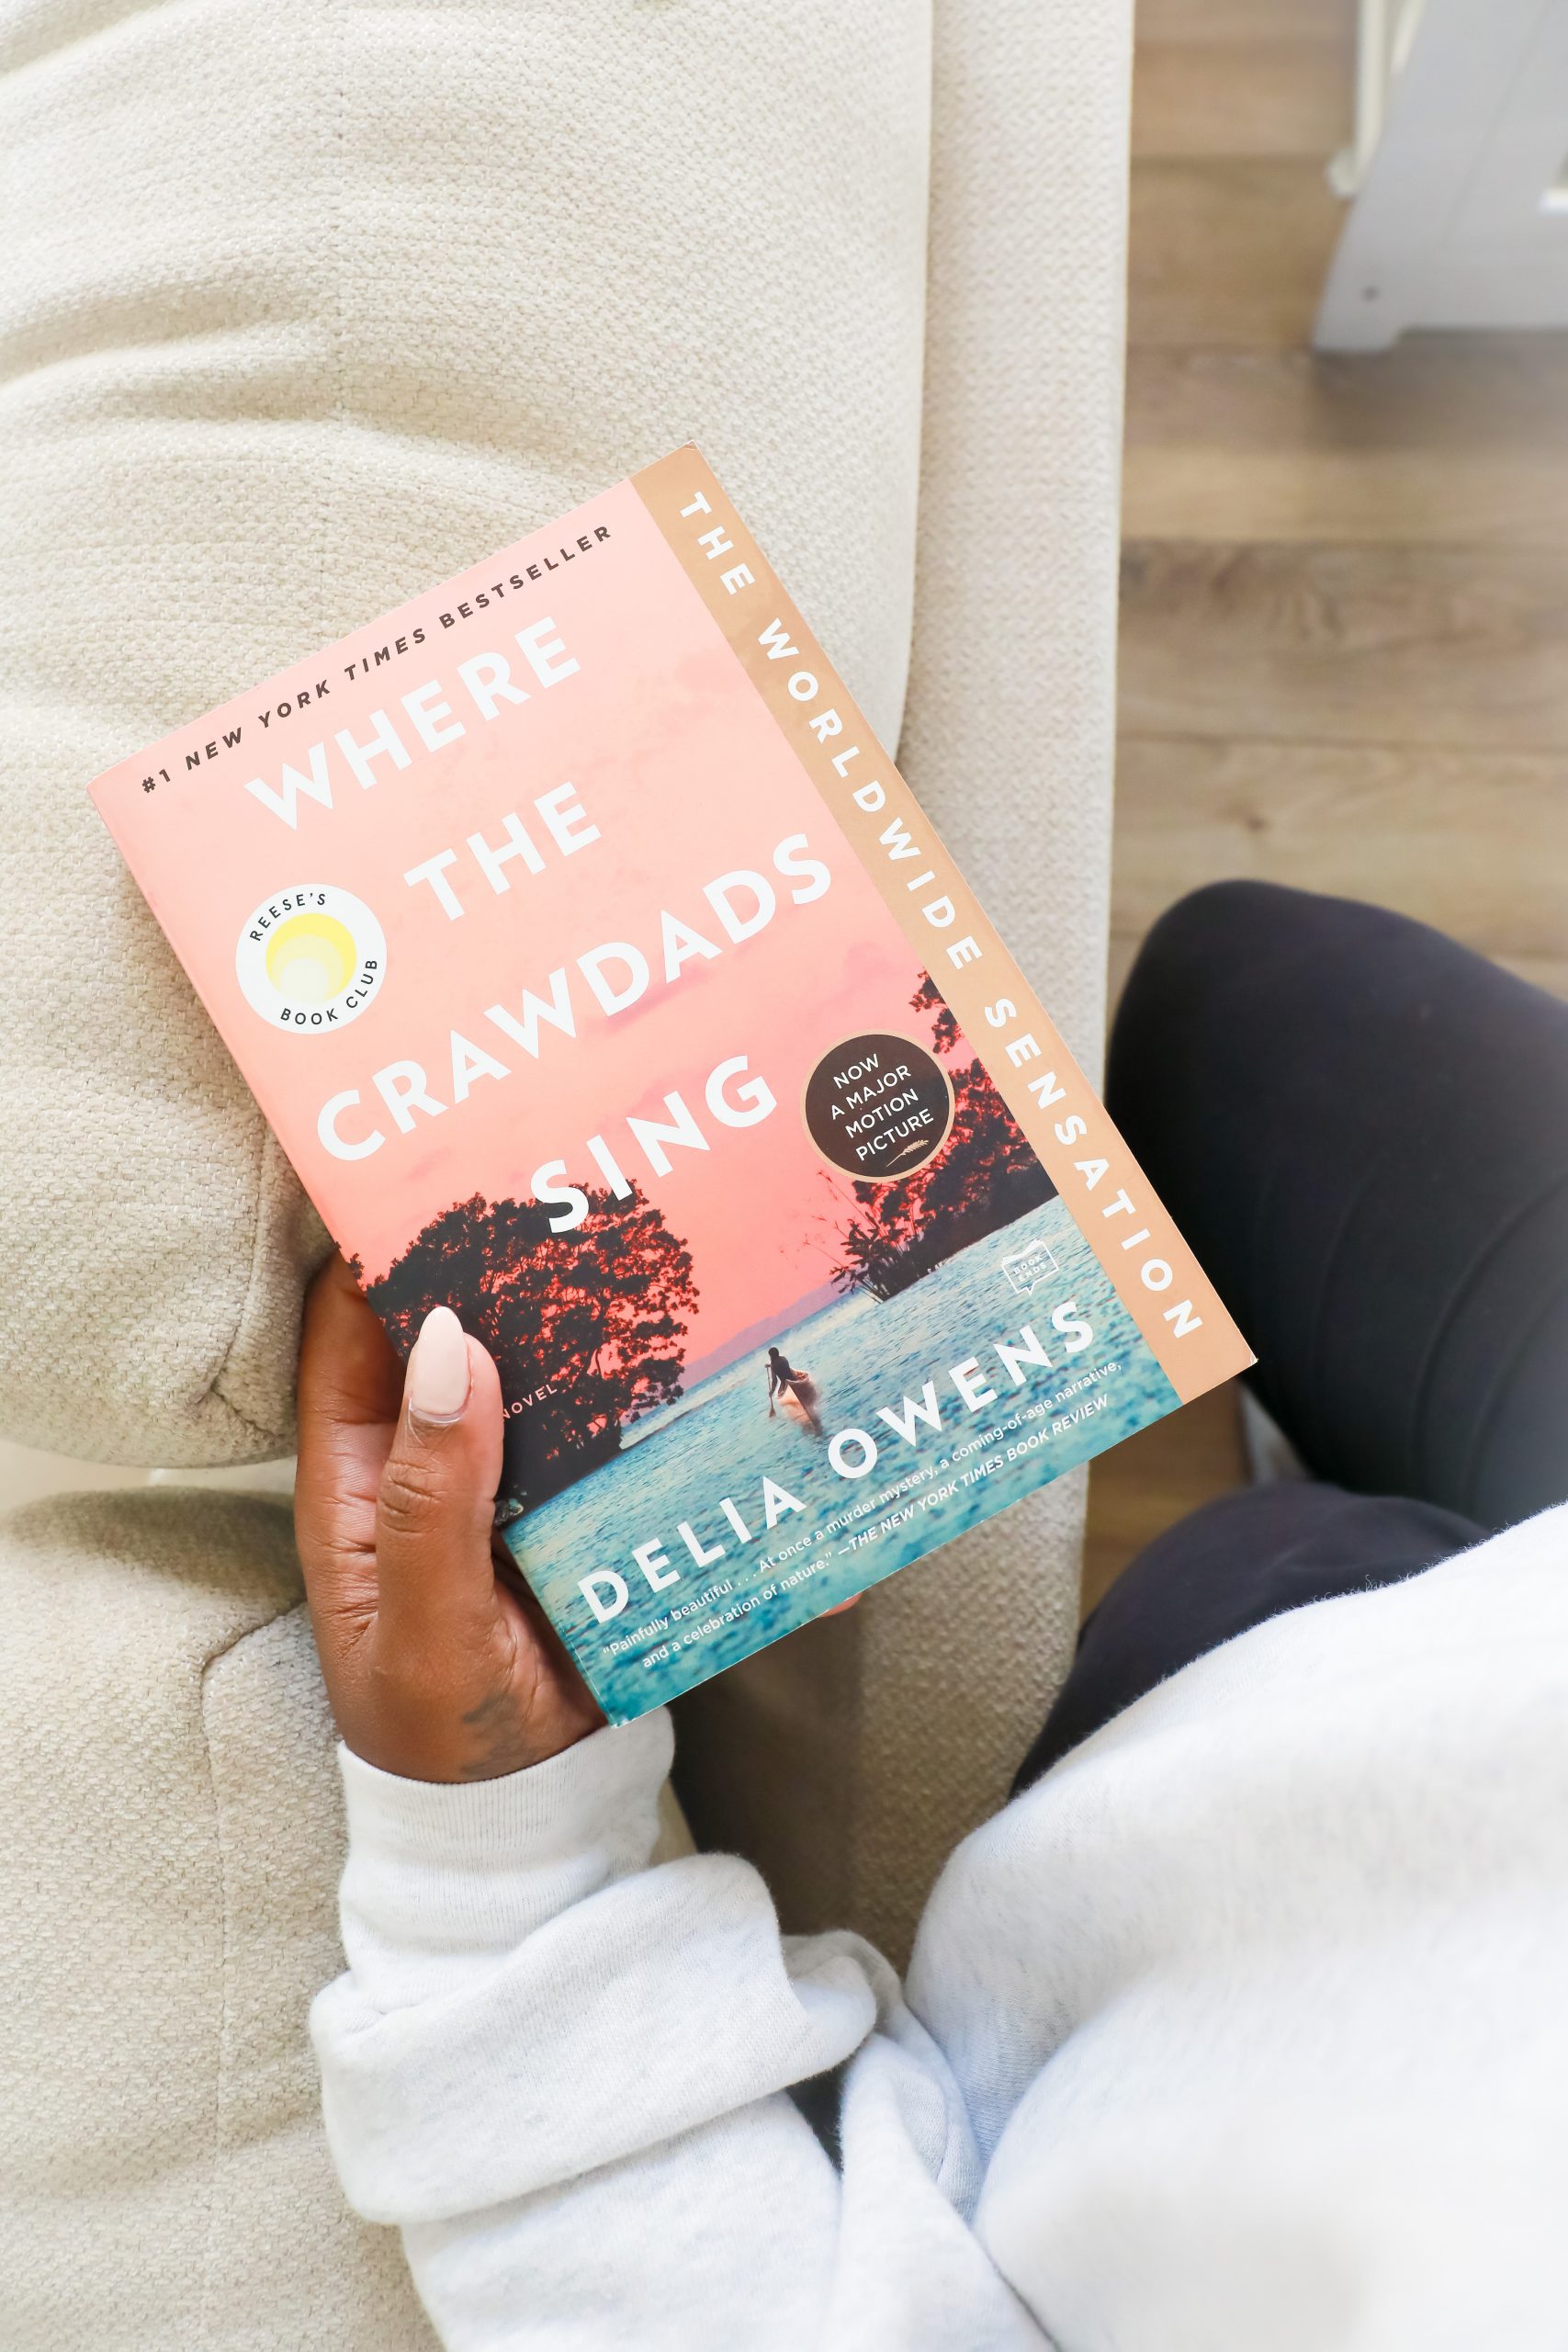 Where The Crawdads Sing (October book review).